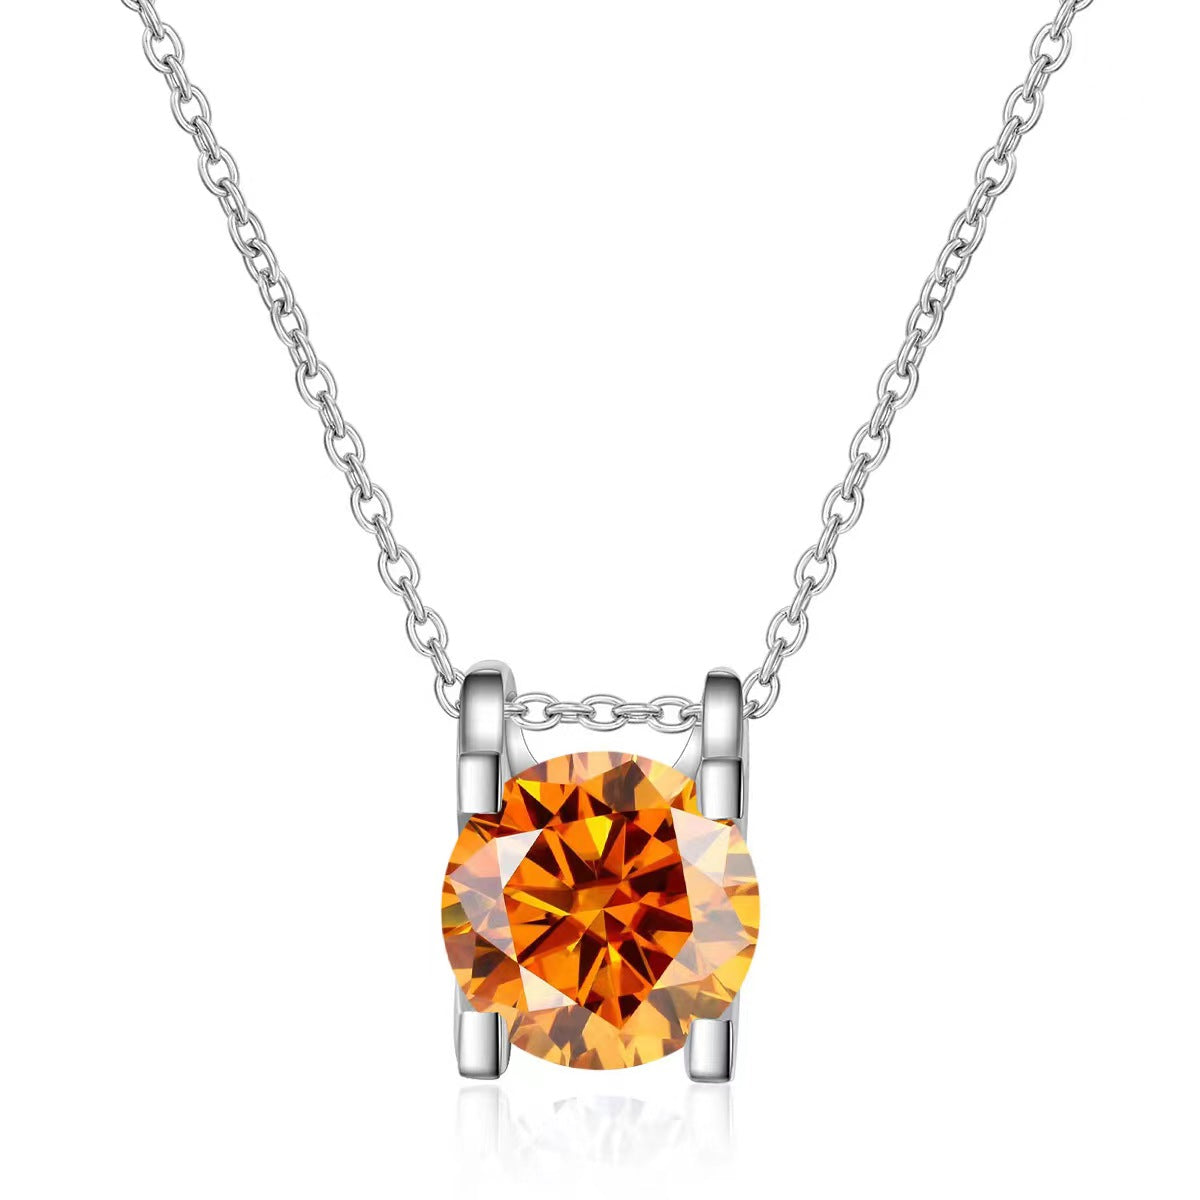 Champagne Moissanite necklace for women